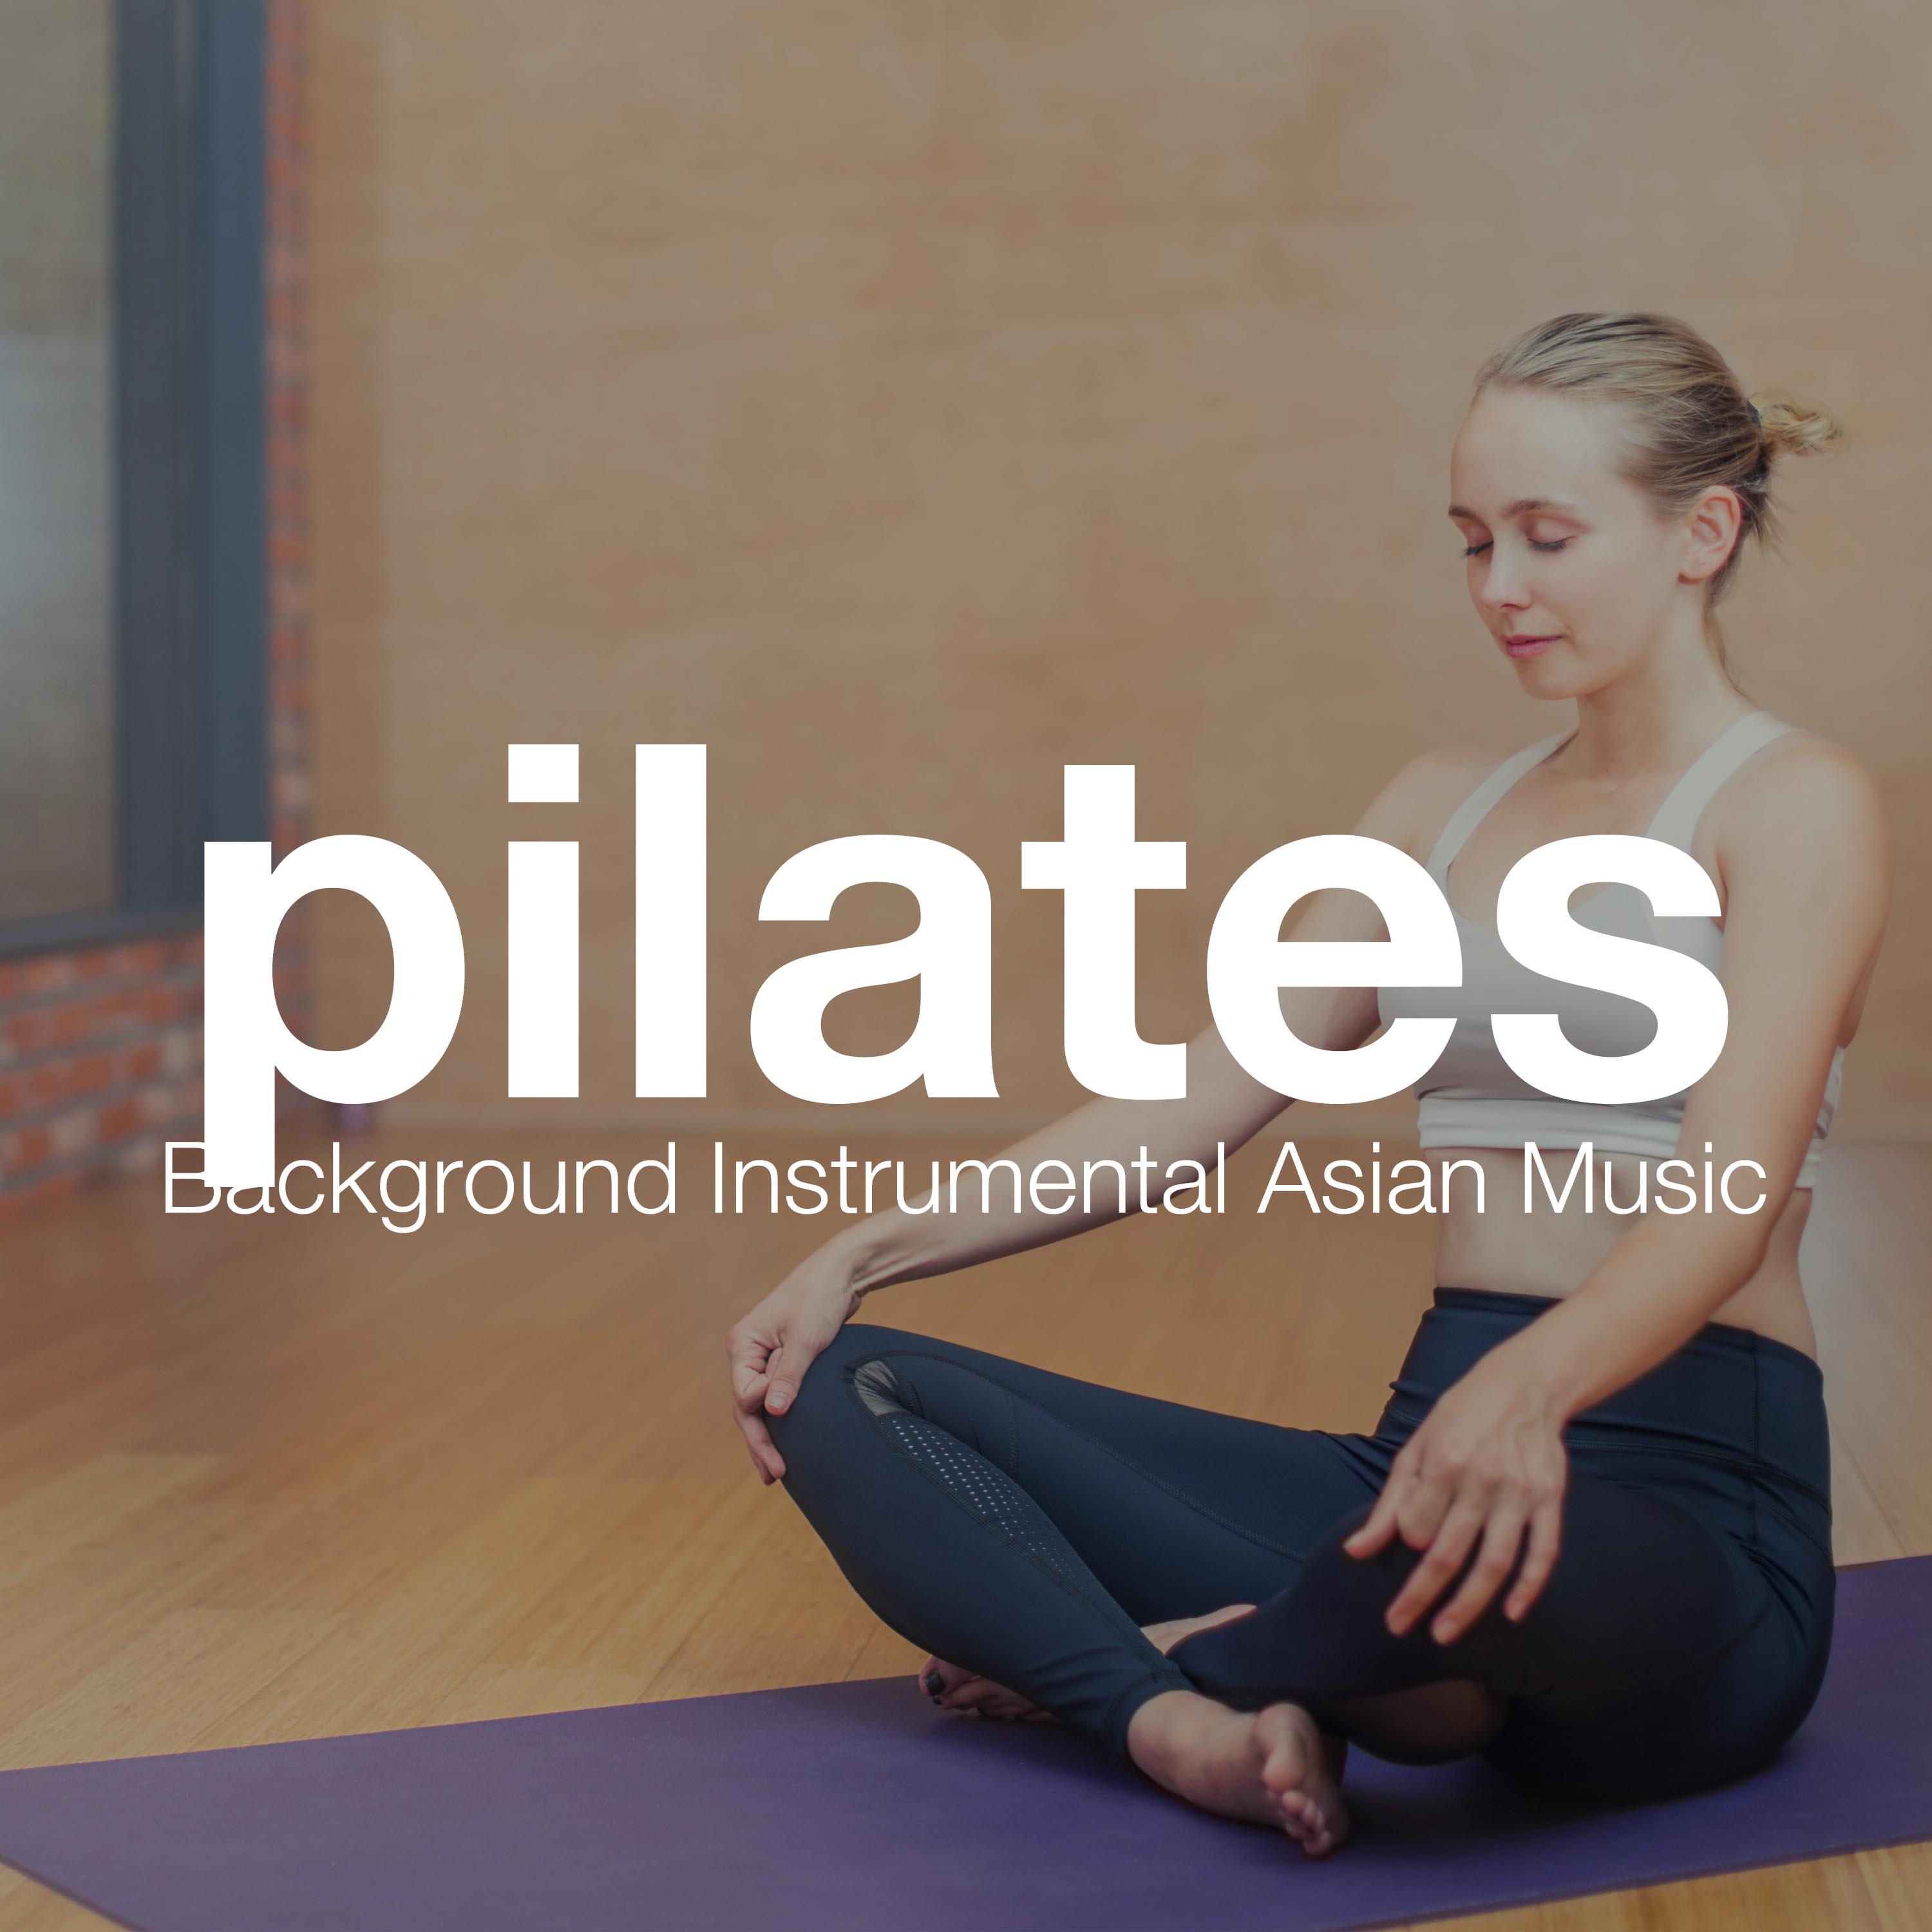 Pilates: Background Instrumental Asian Music for Pilates Exercises or Yoga Class